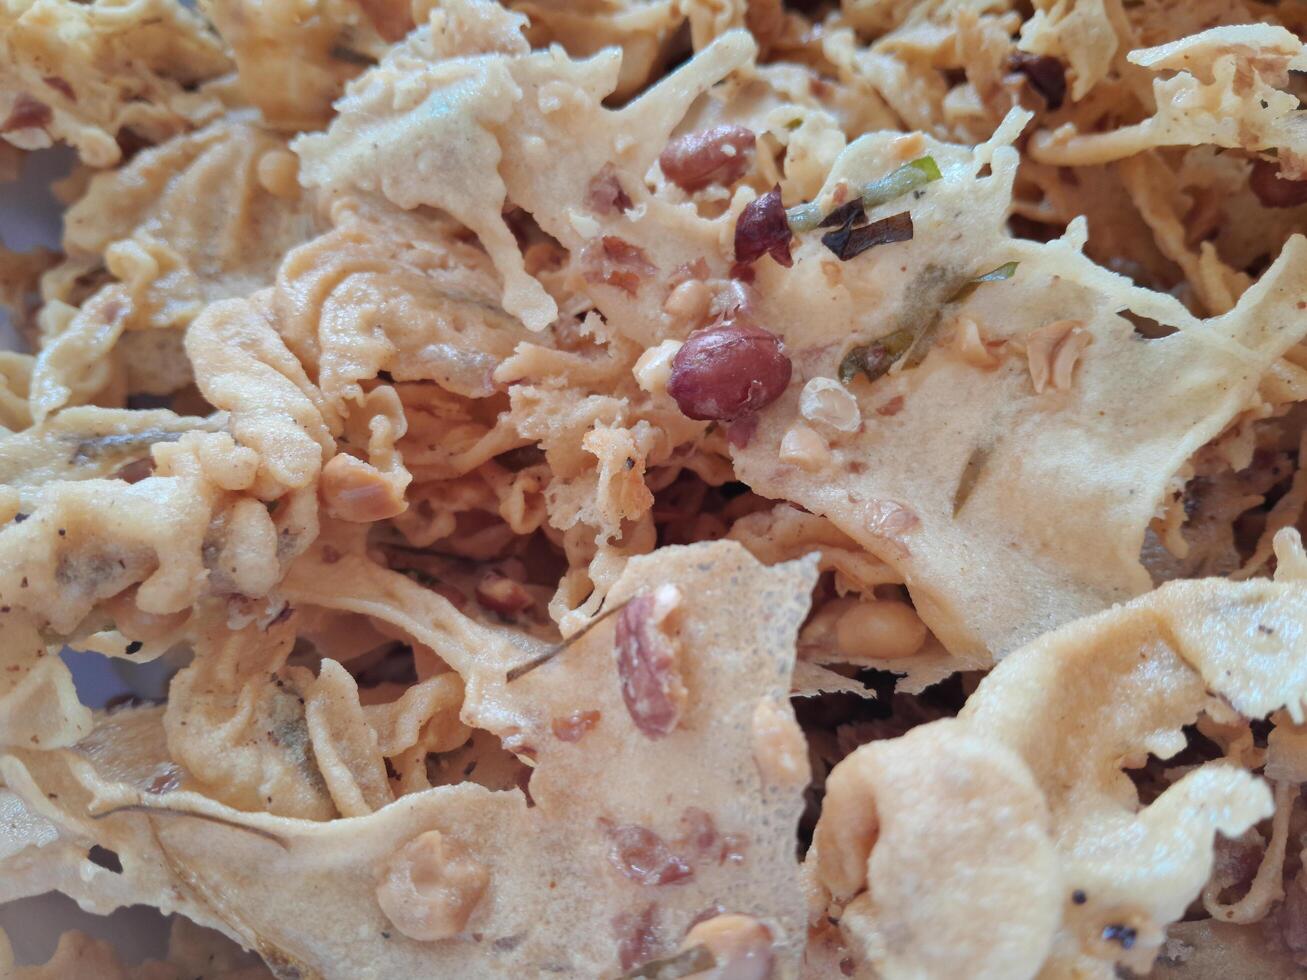 Photo of typical Indonesian food peanut brittle or Peyek, Rempeyek. This photo is perfect for food magazines, tabloid newspapers, food recipe books.